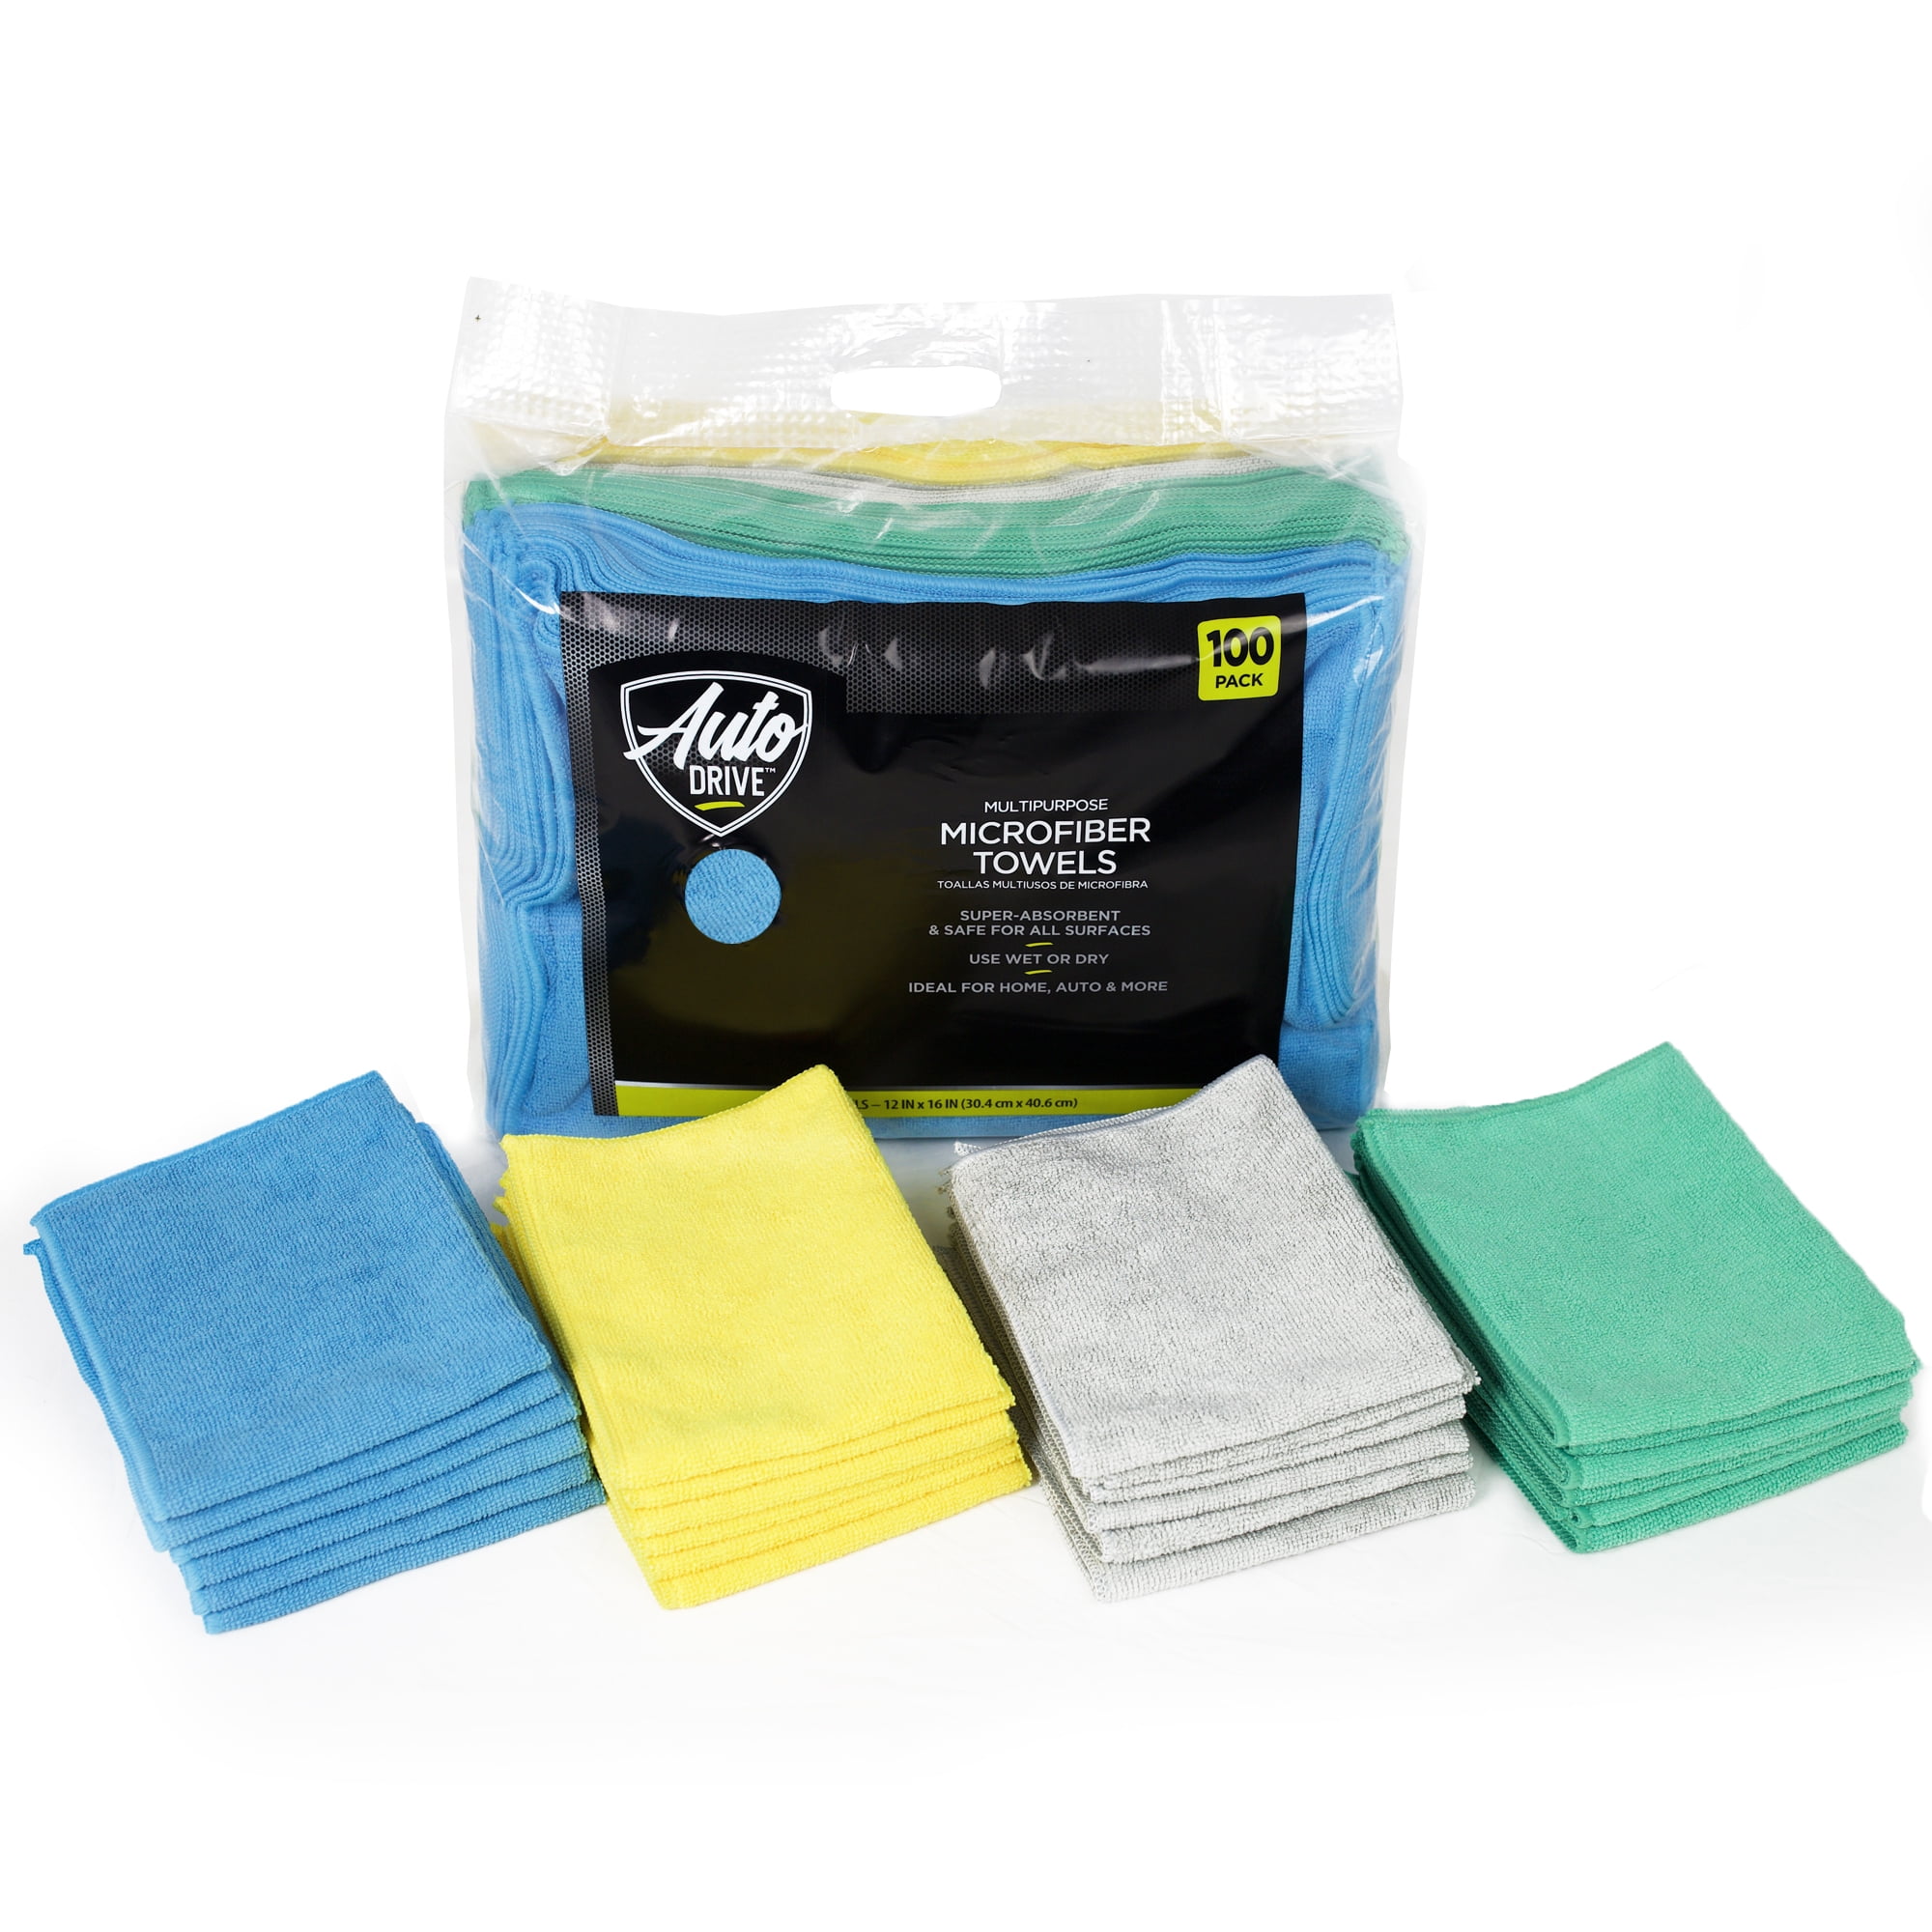 Auto Drive Microfiber Car Wax. Applicator Pads with Gripper Handle